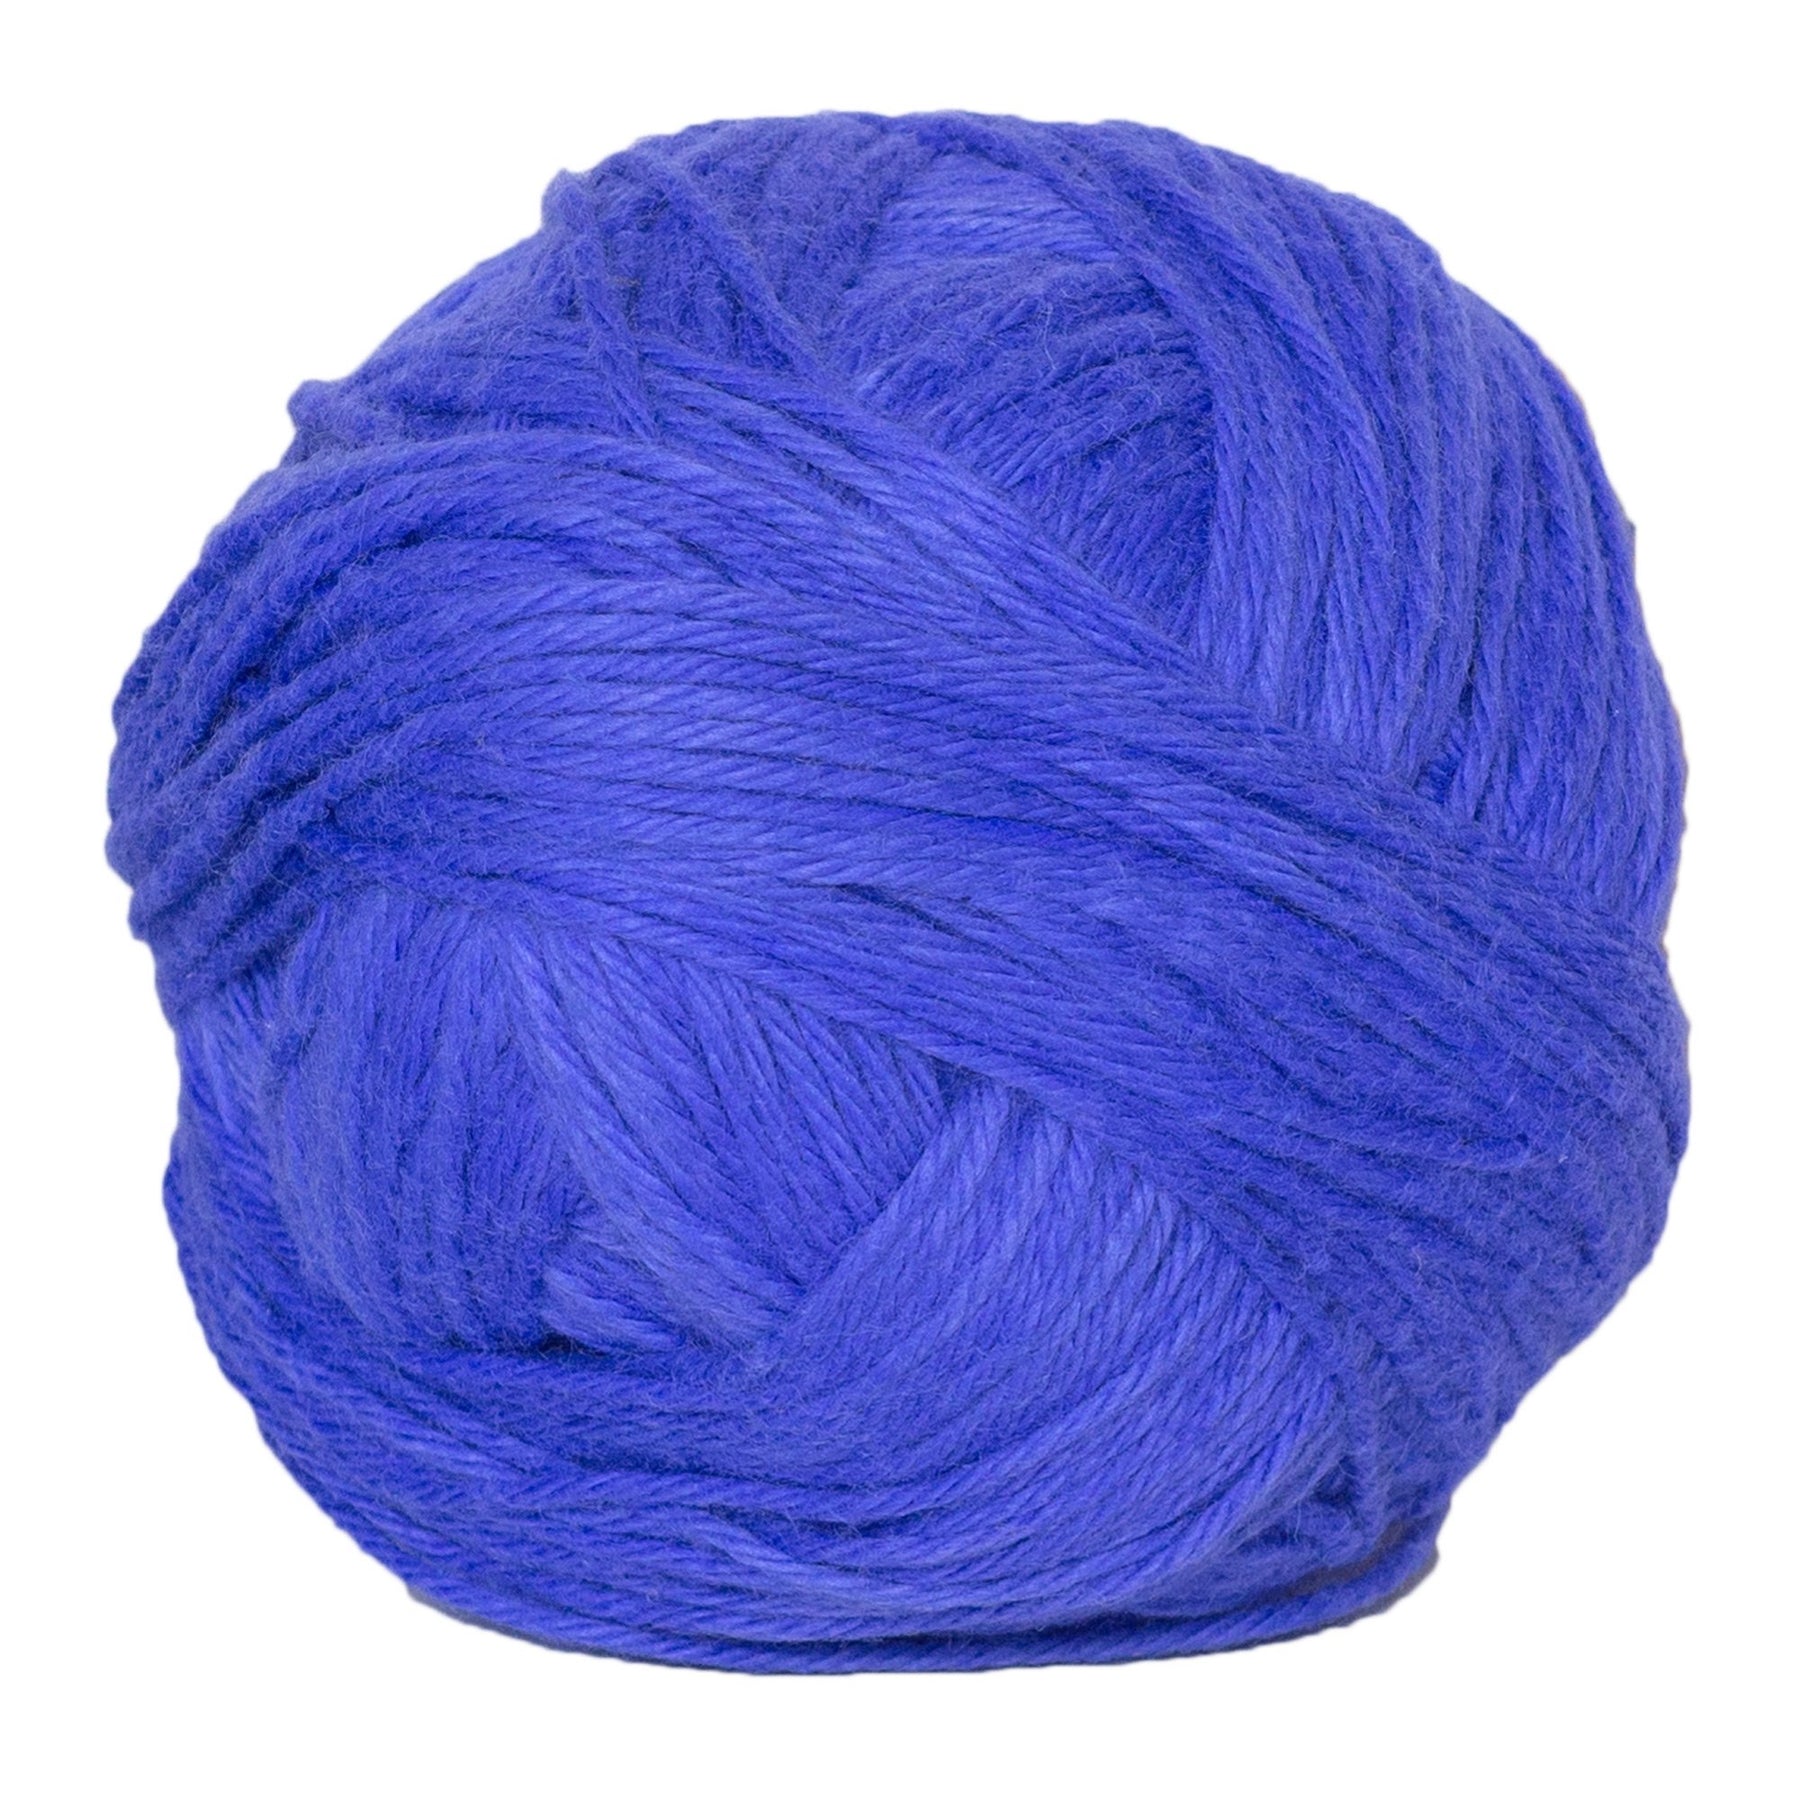 <span class='sale-tag '>Sale!</span> Blue Yarn Ball - Naturally Dyed Organic Cotton - assorted hues